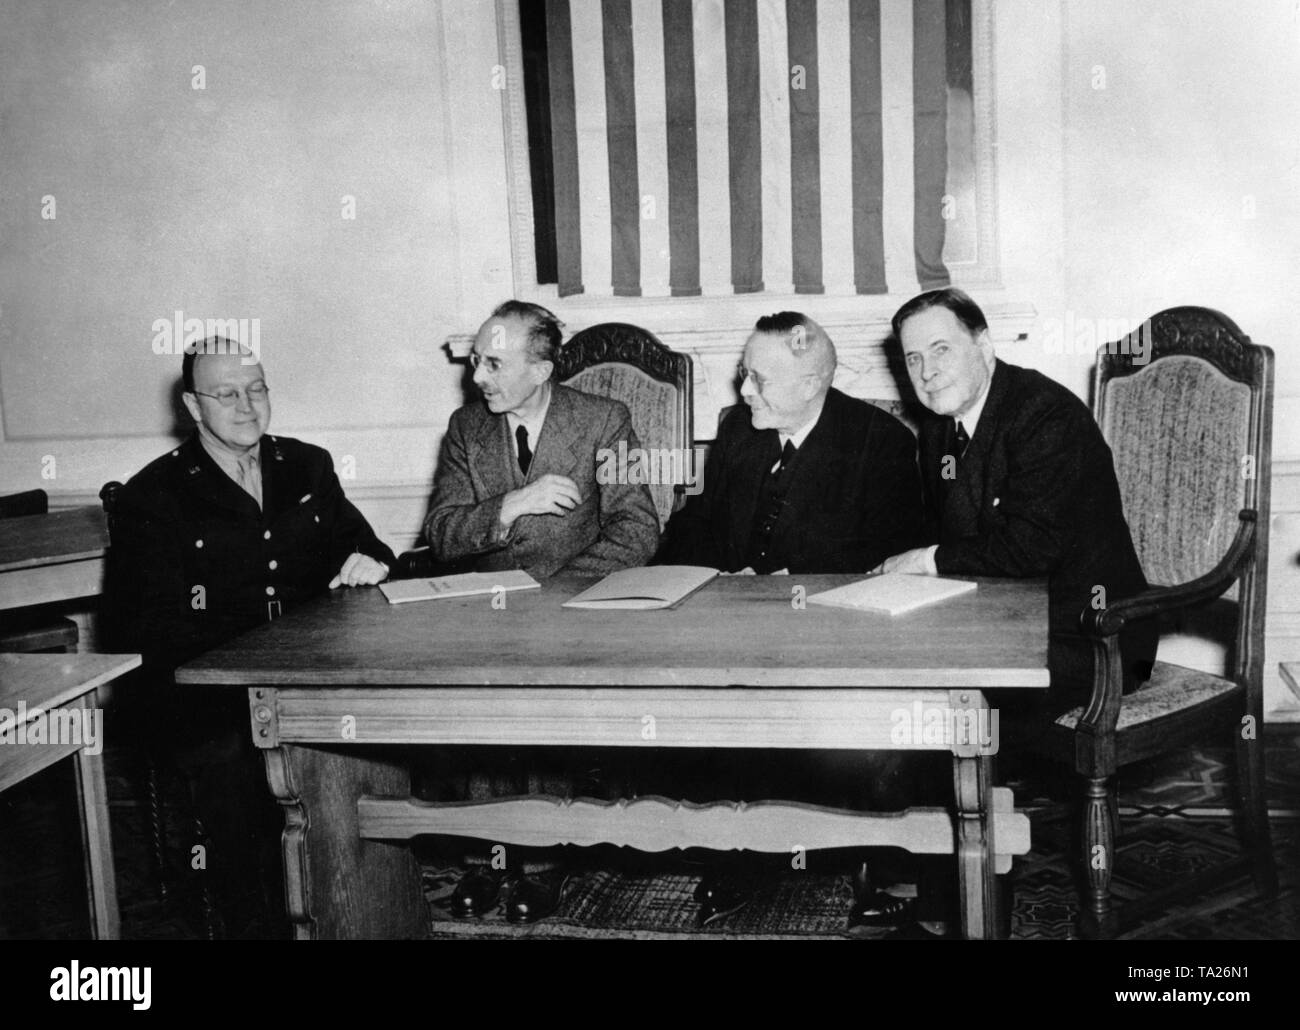 This photograph shows the representatives of the states of the American occupation zone at a meeting with the representatives of the occupying powers. The Landrat was the forerunner of a later German government. From left: Pollock, political adviser to the US military governor, dr. Wilhelm Hoegner, Minister President of Bavaria, Dr. Ing. Reinhold Maier, Minister President of Wuerttemberg Baden and Prof. Dr. med. Karl Geiler, Minister President of Hesse. Stock Photo